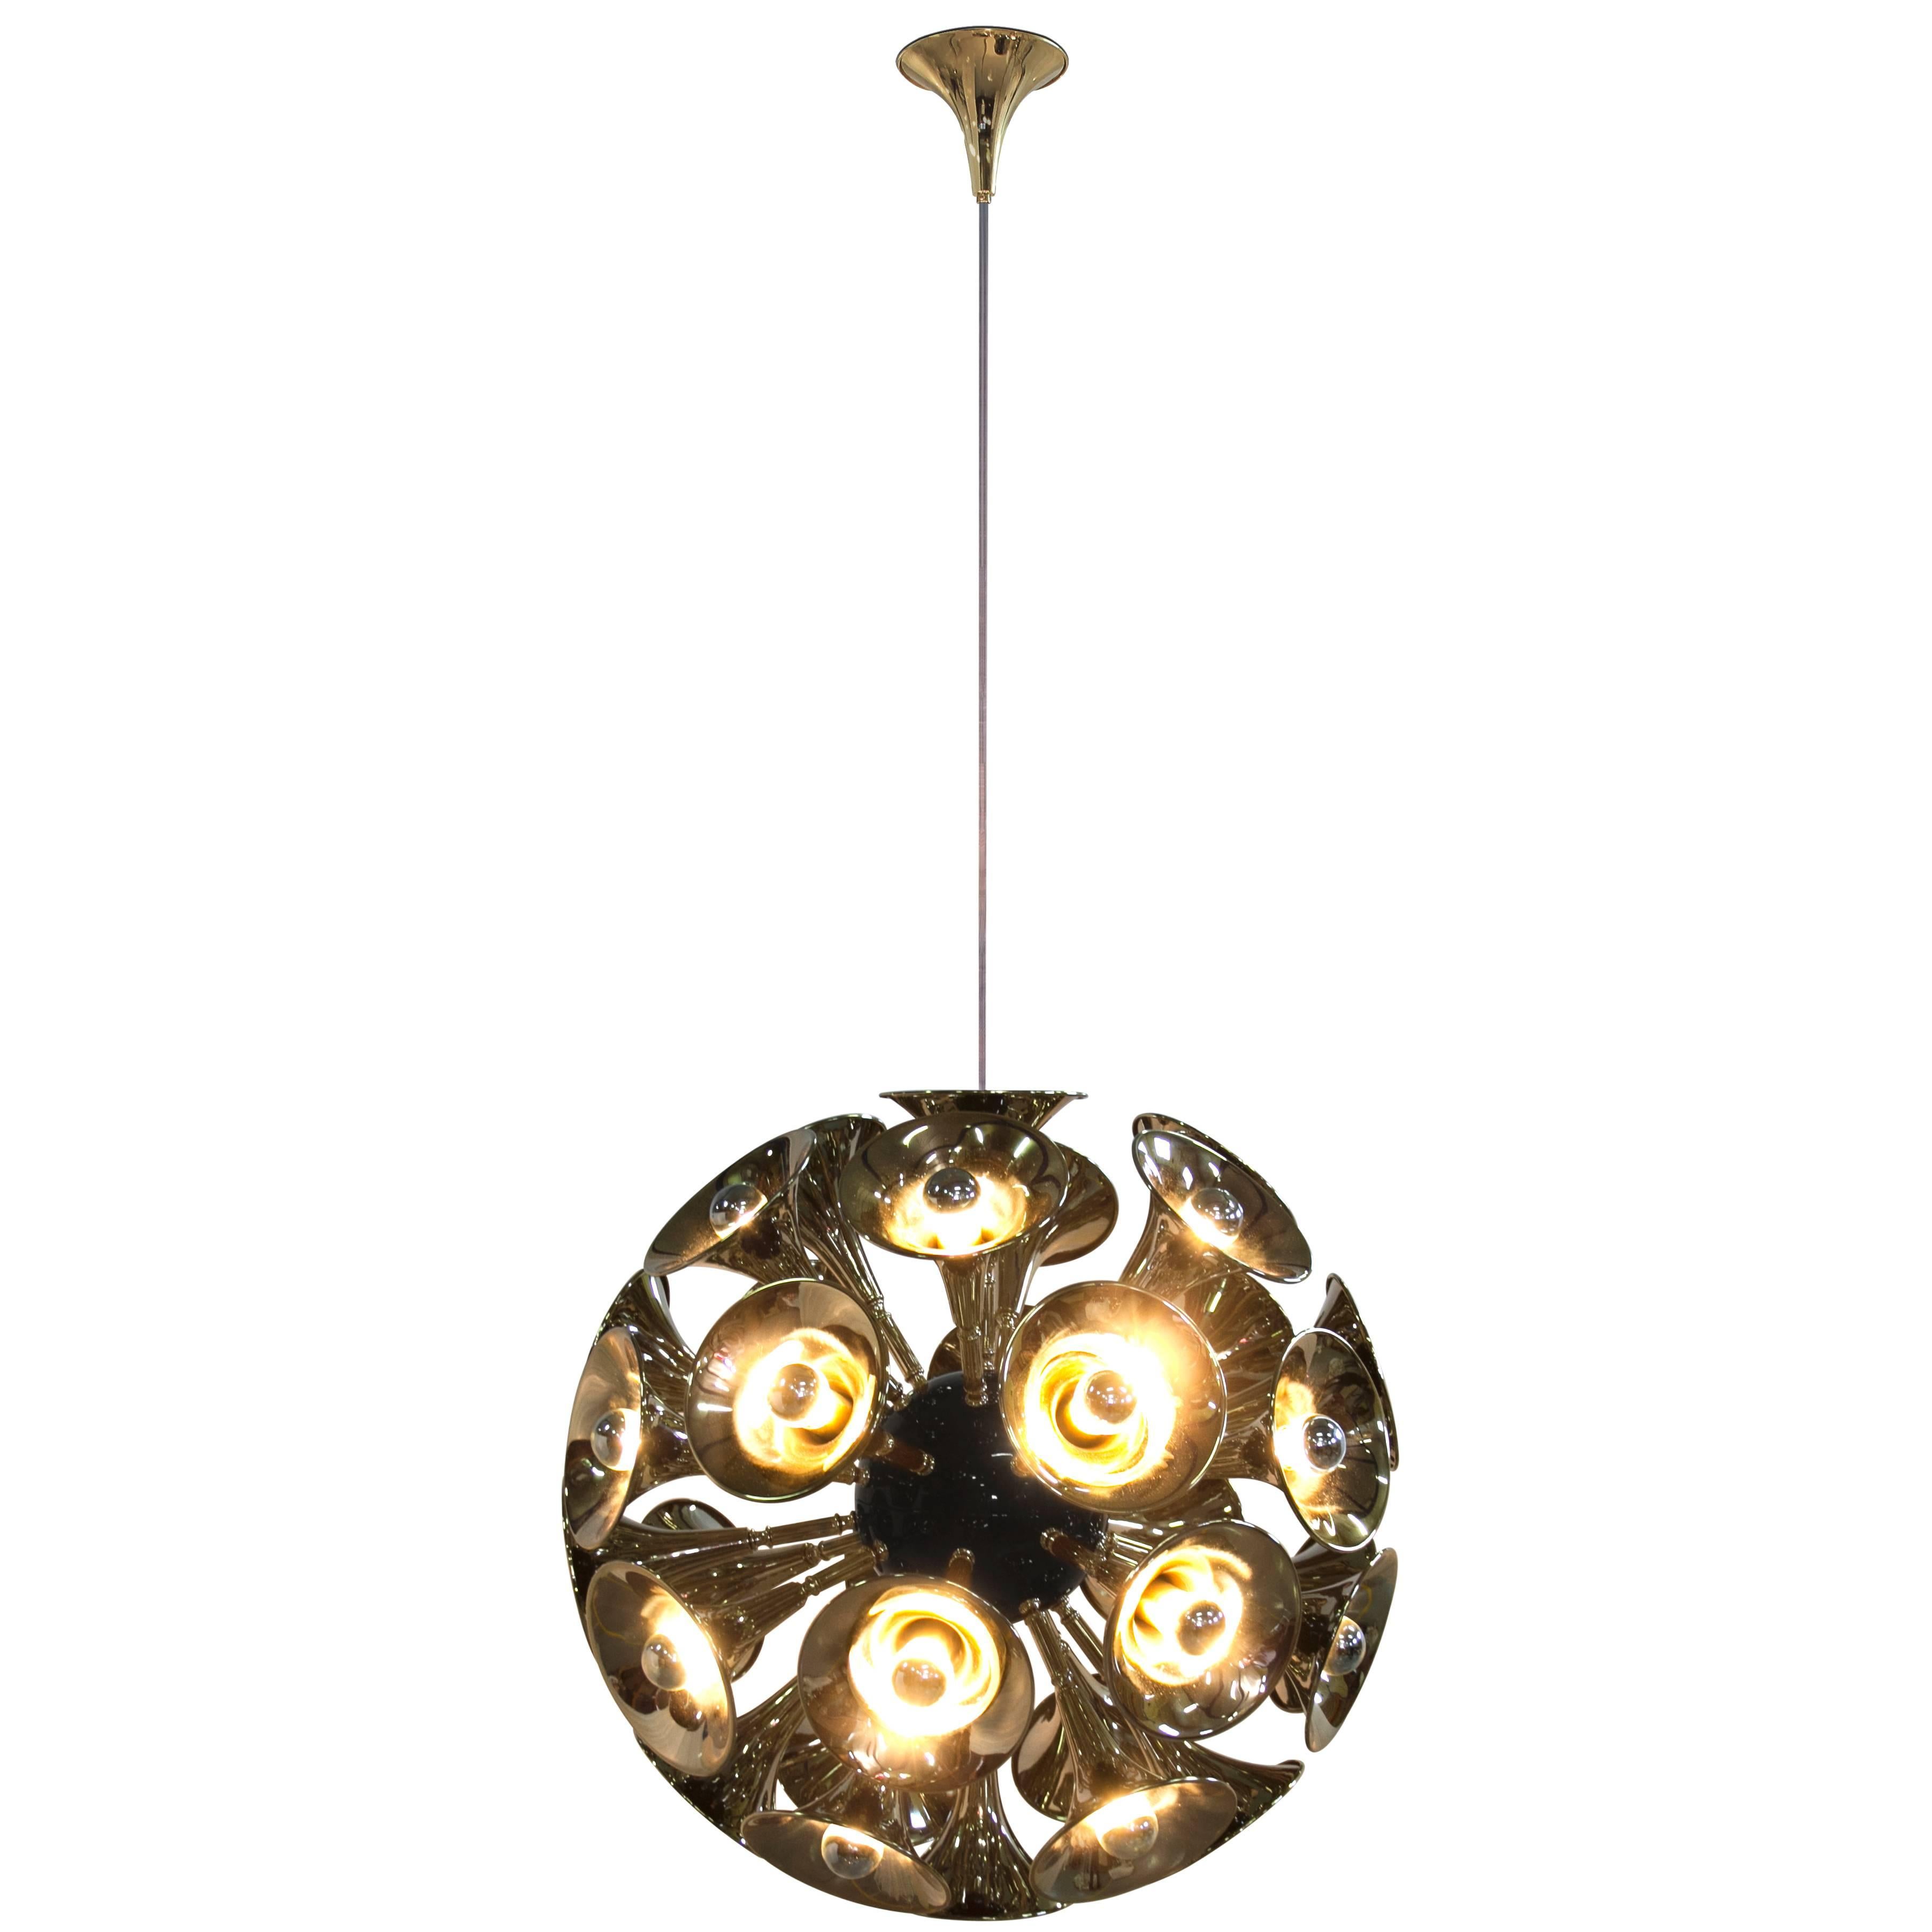 European Art Deco Botti Gold and Brass Spherical Chandelier by Delightful For Sale